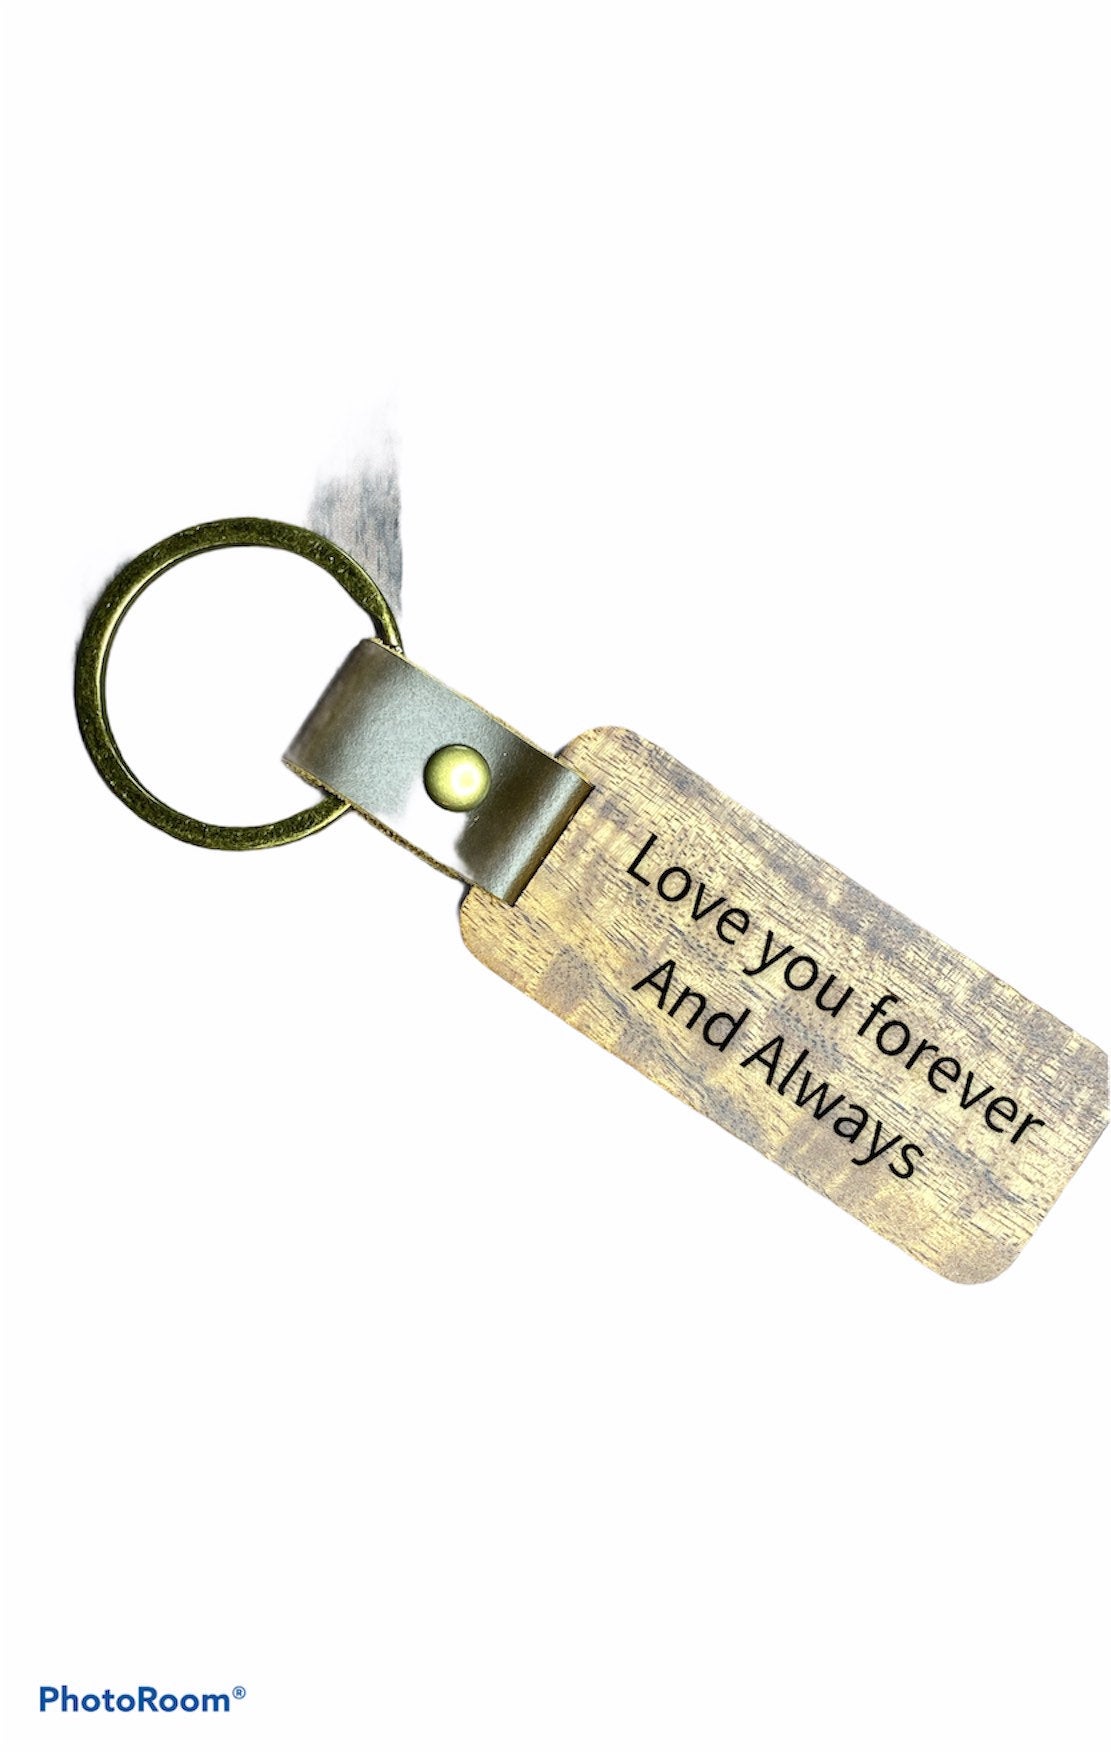 Wooden key fob keychain, engravable wooden keychain, keychain, gift for dad, gift for him